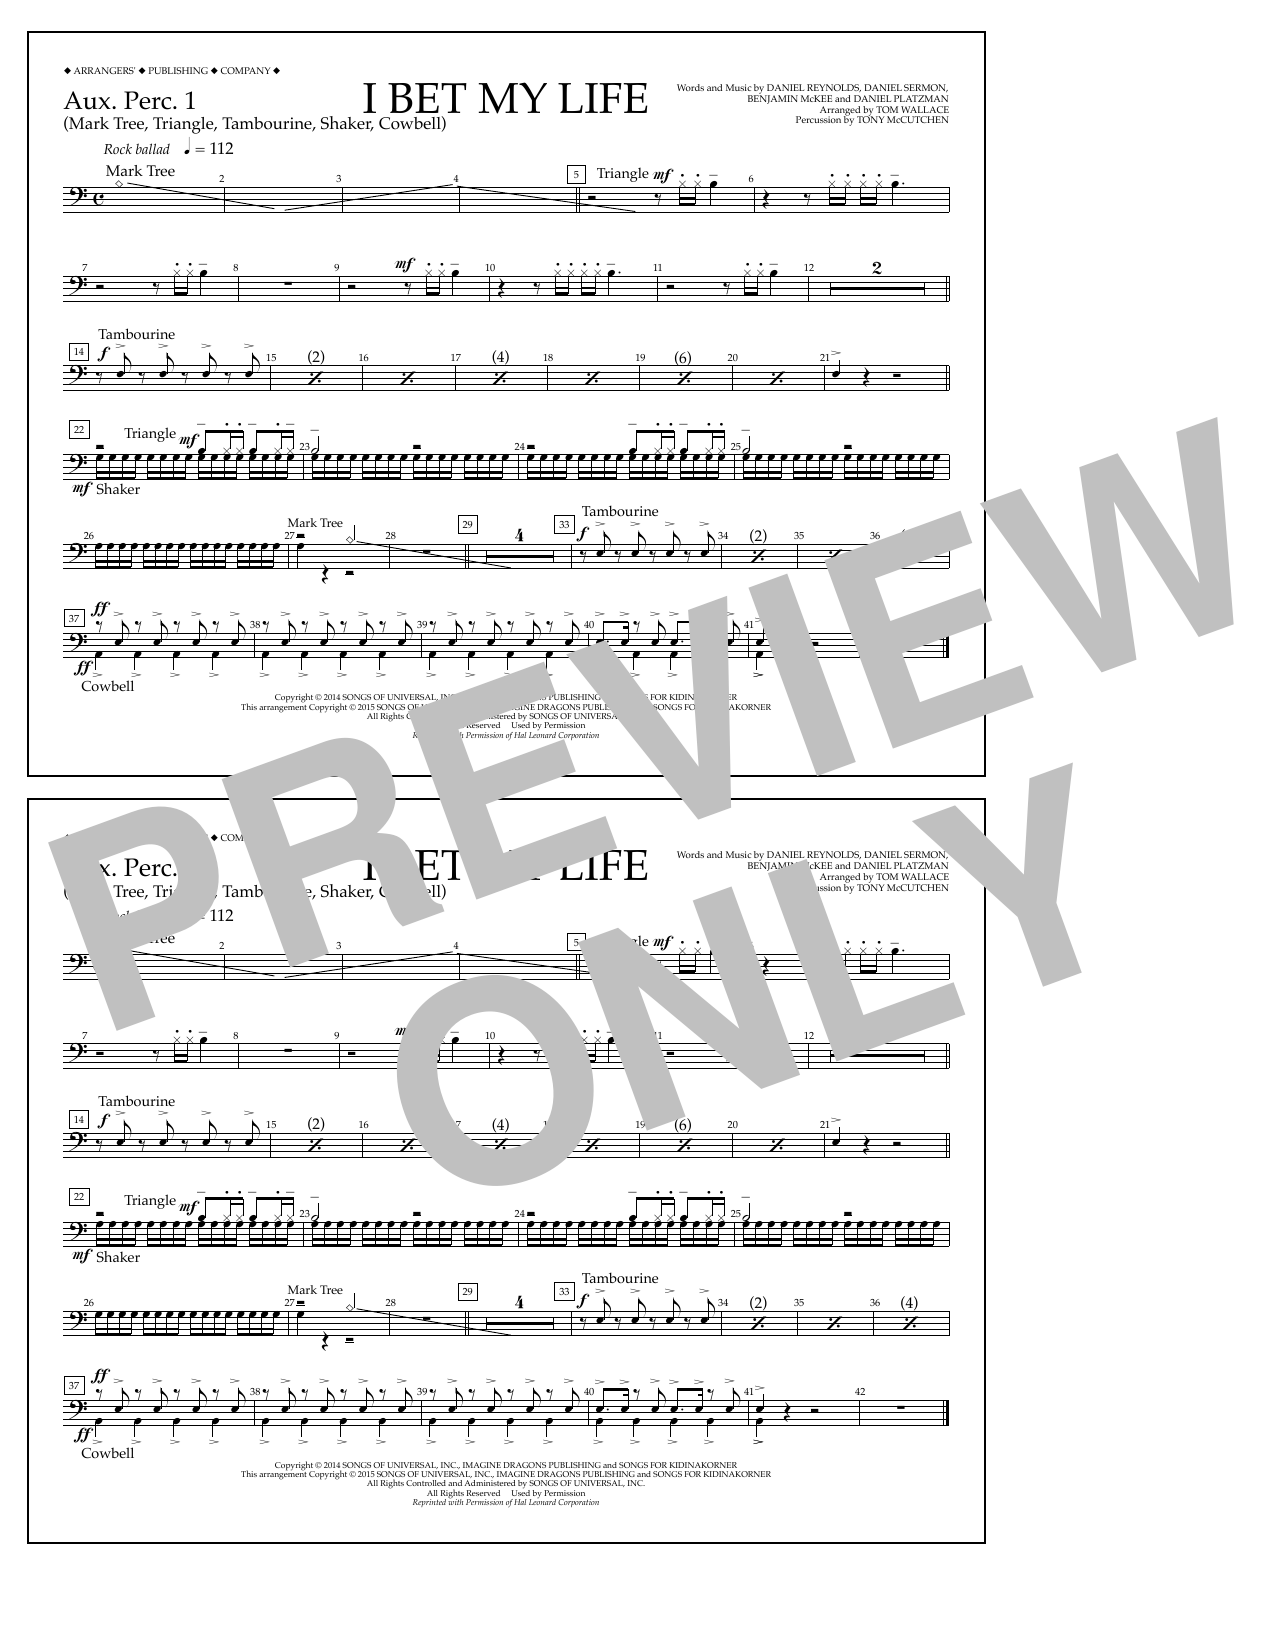 Download Tom Wallace I Bet My Life - Aux. Perc. 1 Sheet Music